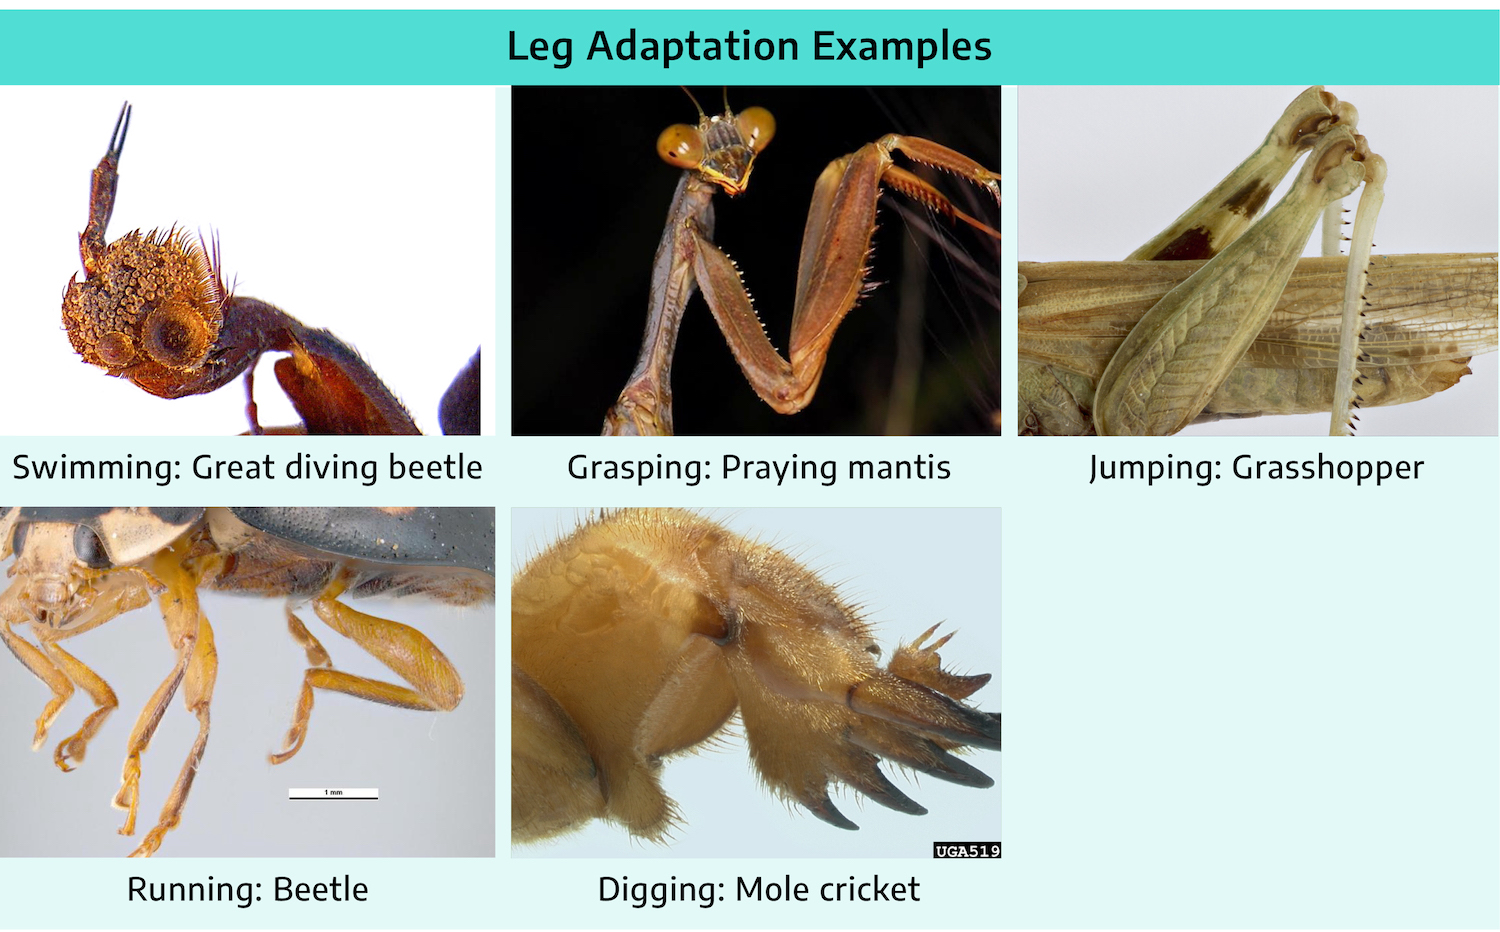 Five photographs showing leg adaptations on different insects. First is a great diving beetle with legs for swimming; short and feathery with a "hairy" node on the joining with the small spindly feet following this. Next is a praying mantis with legs for grasping; long, hooked angular legs with long spindly "claws". Next is grasshopper with legs for jumping; a thick section with a 30 degree angle into a skinnier part of the leg. Next is a beetle with legs for running; many short legs with small angular bending and small hooked feet. Last is a mole cricket for digging; short wide legs that end in thick claws.